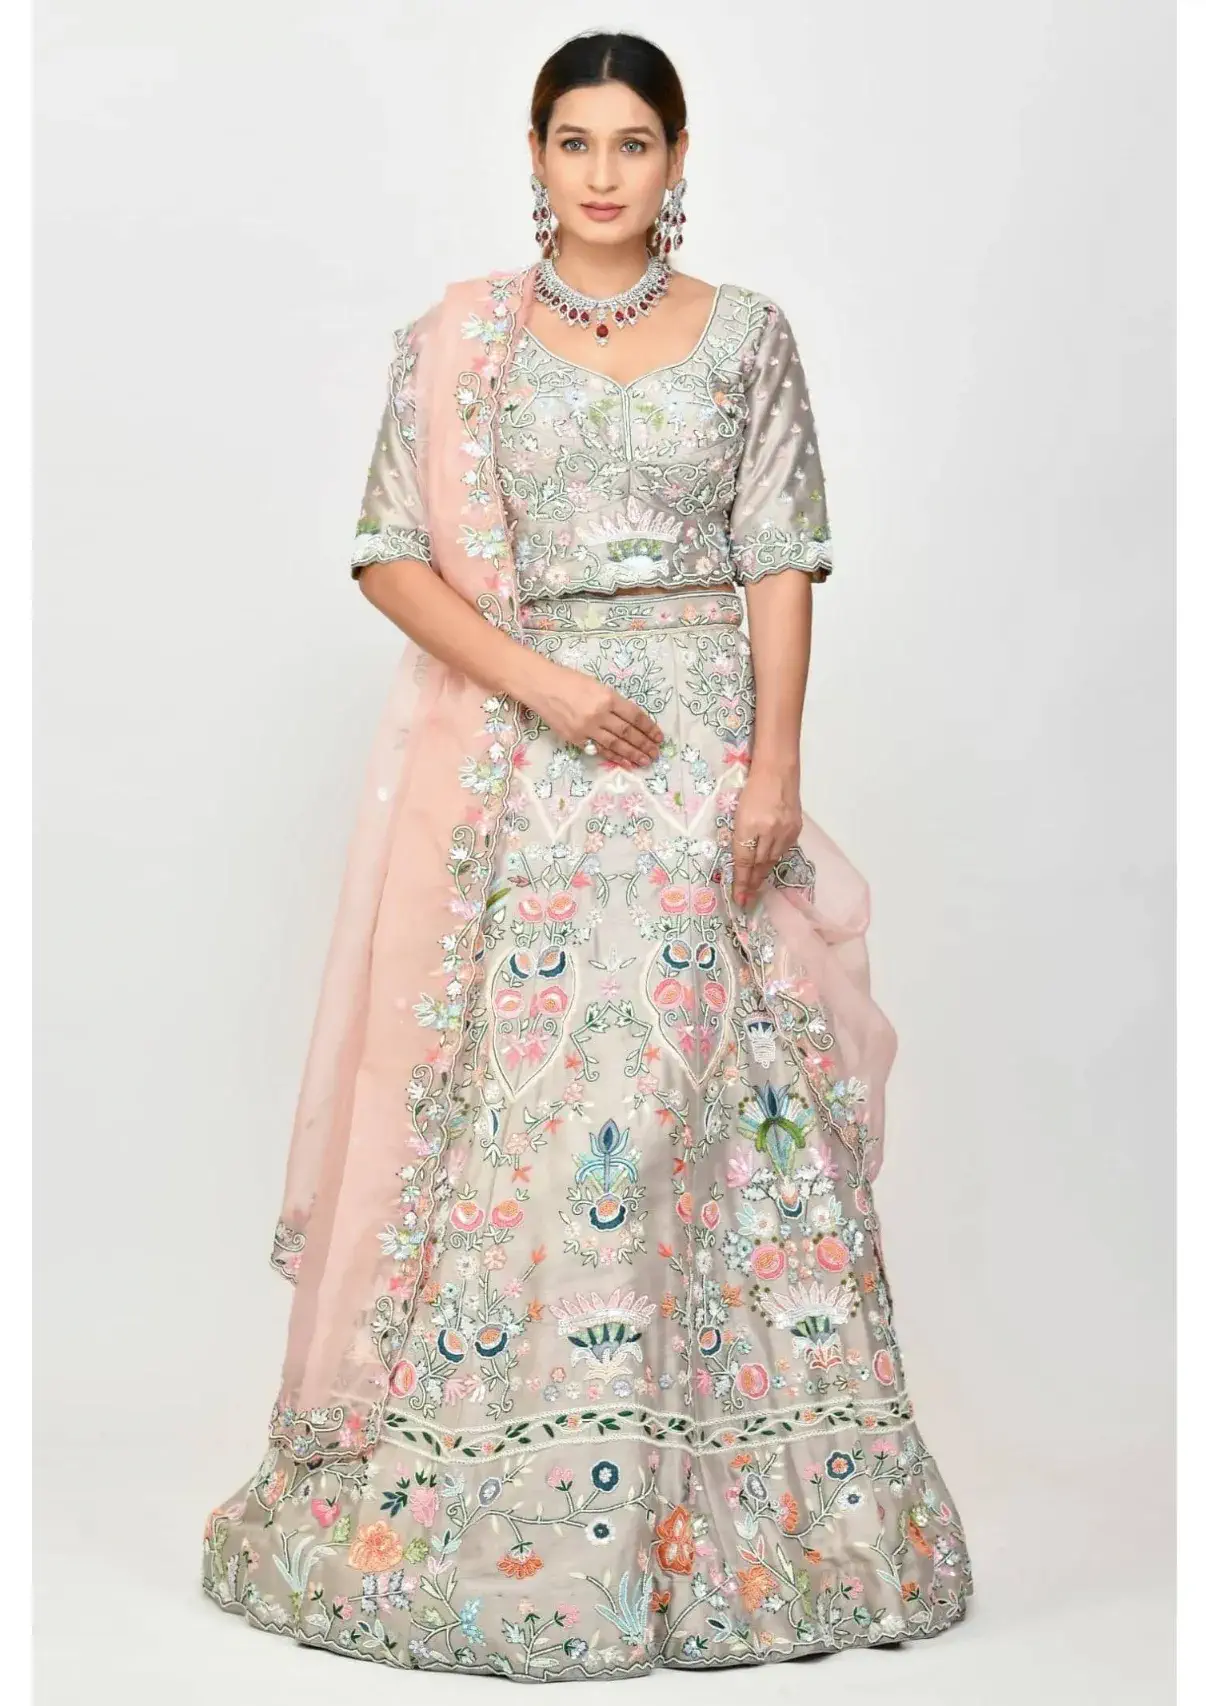 DUSTY PEACH CLASSIC LEHENGA SET WITH ALL OVER PATTERNED EMBROIDERY AND  SHOULDER TASSELED DETAILS PAIRED WITH A MATCHING DUPATTA AND AND ALL OVER  MIRROR WORK AND SILVER EMBELLISHMENTS. - Seasons India